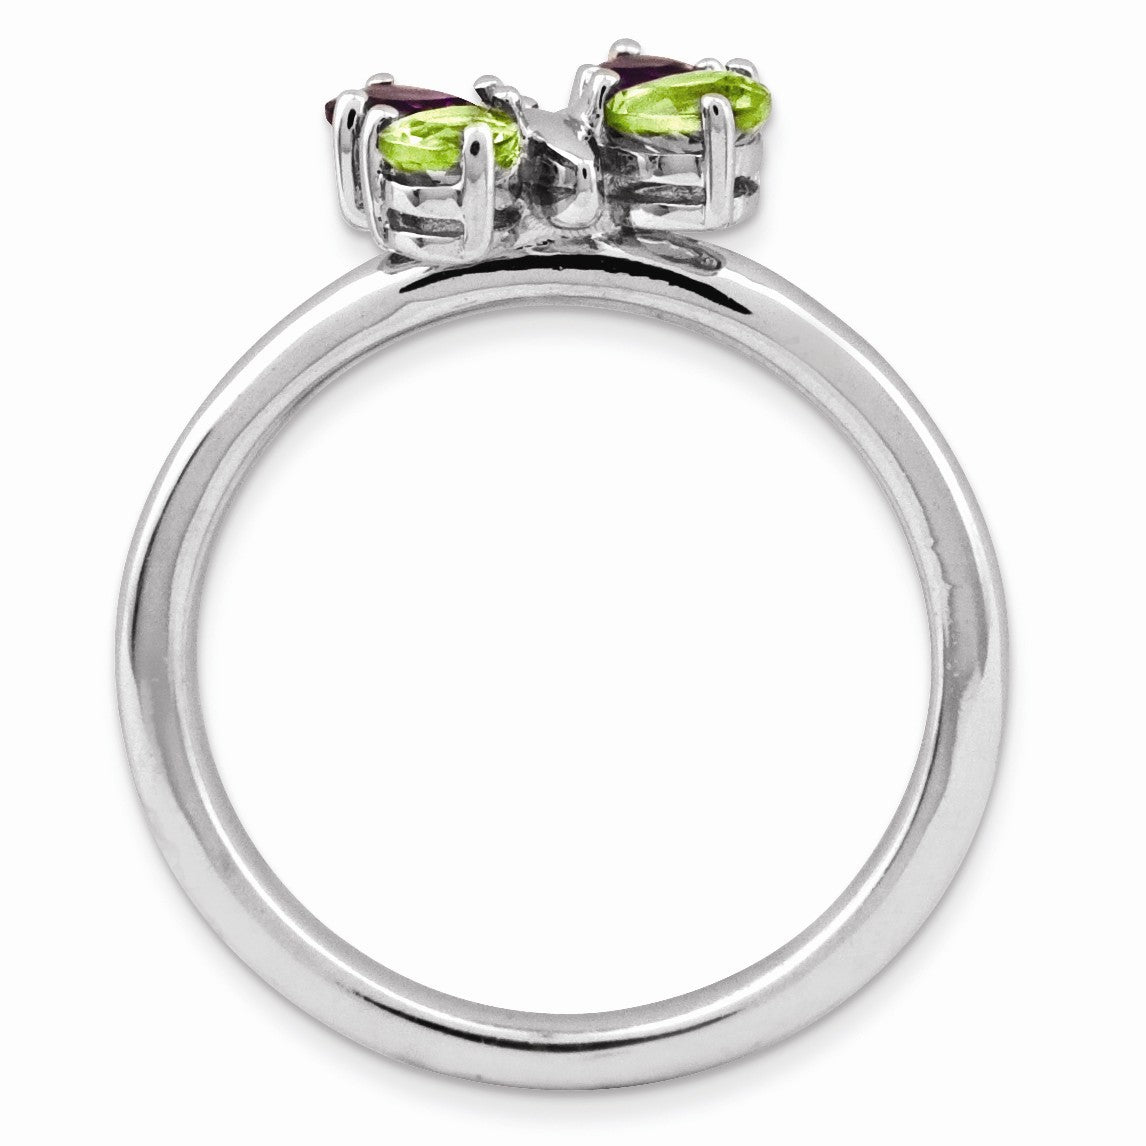 Alternate view of the Sterling Silver Peridot and Amethyst Stackable Gemstone Butterfly Ring by The Black Bow Jewelry Co.